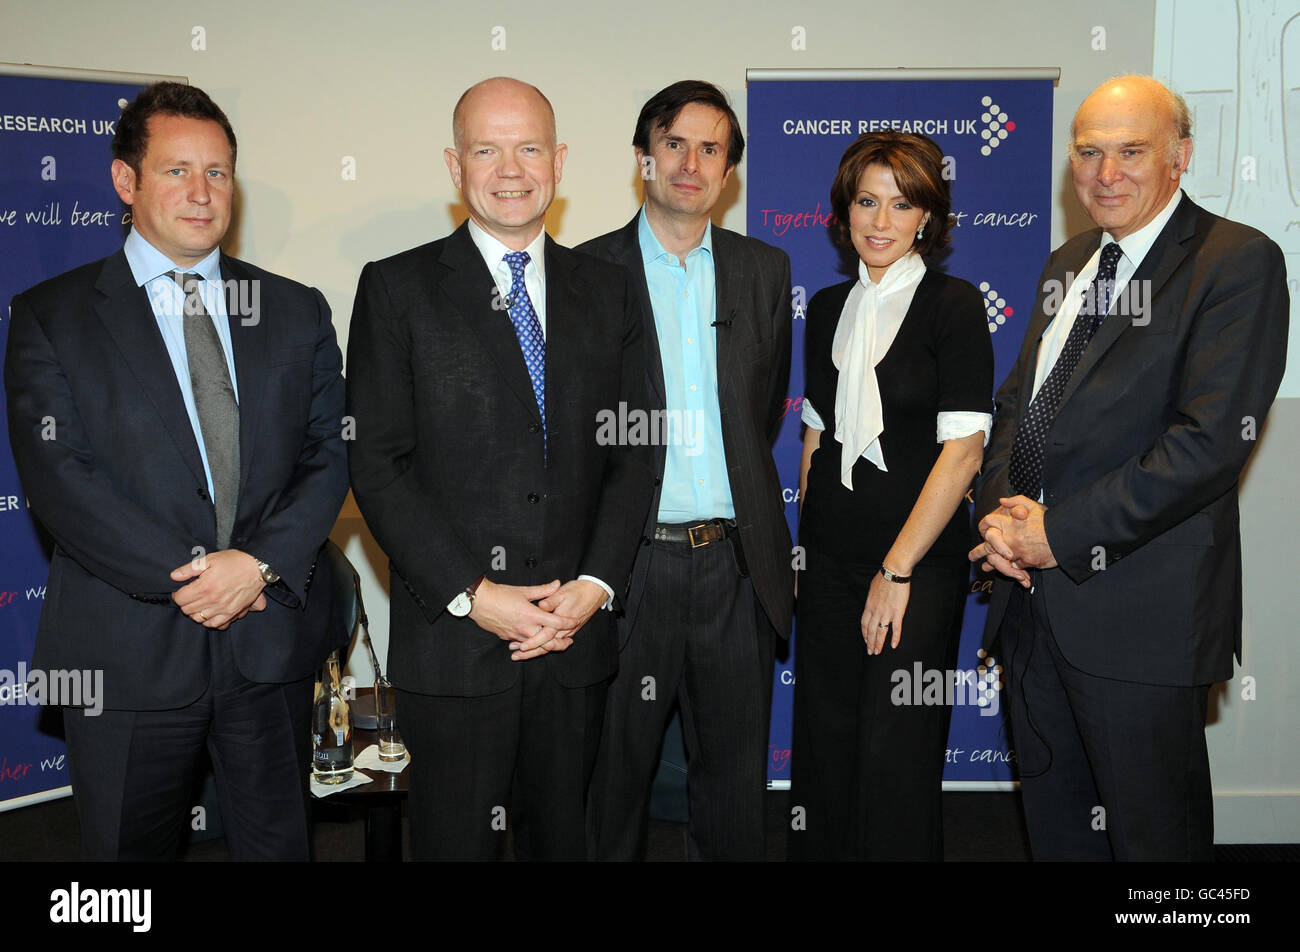 (left to right) Ed Vasey, William Hague, Robert Peston, Natasha Kaplinsky and Vice Cable attend the Cancer Research UK tenth annual Turn the Tables event at BAFTA, London. Stock Photo